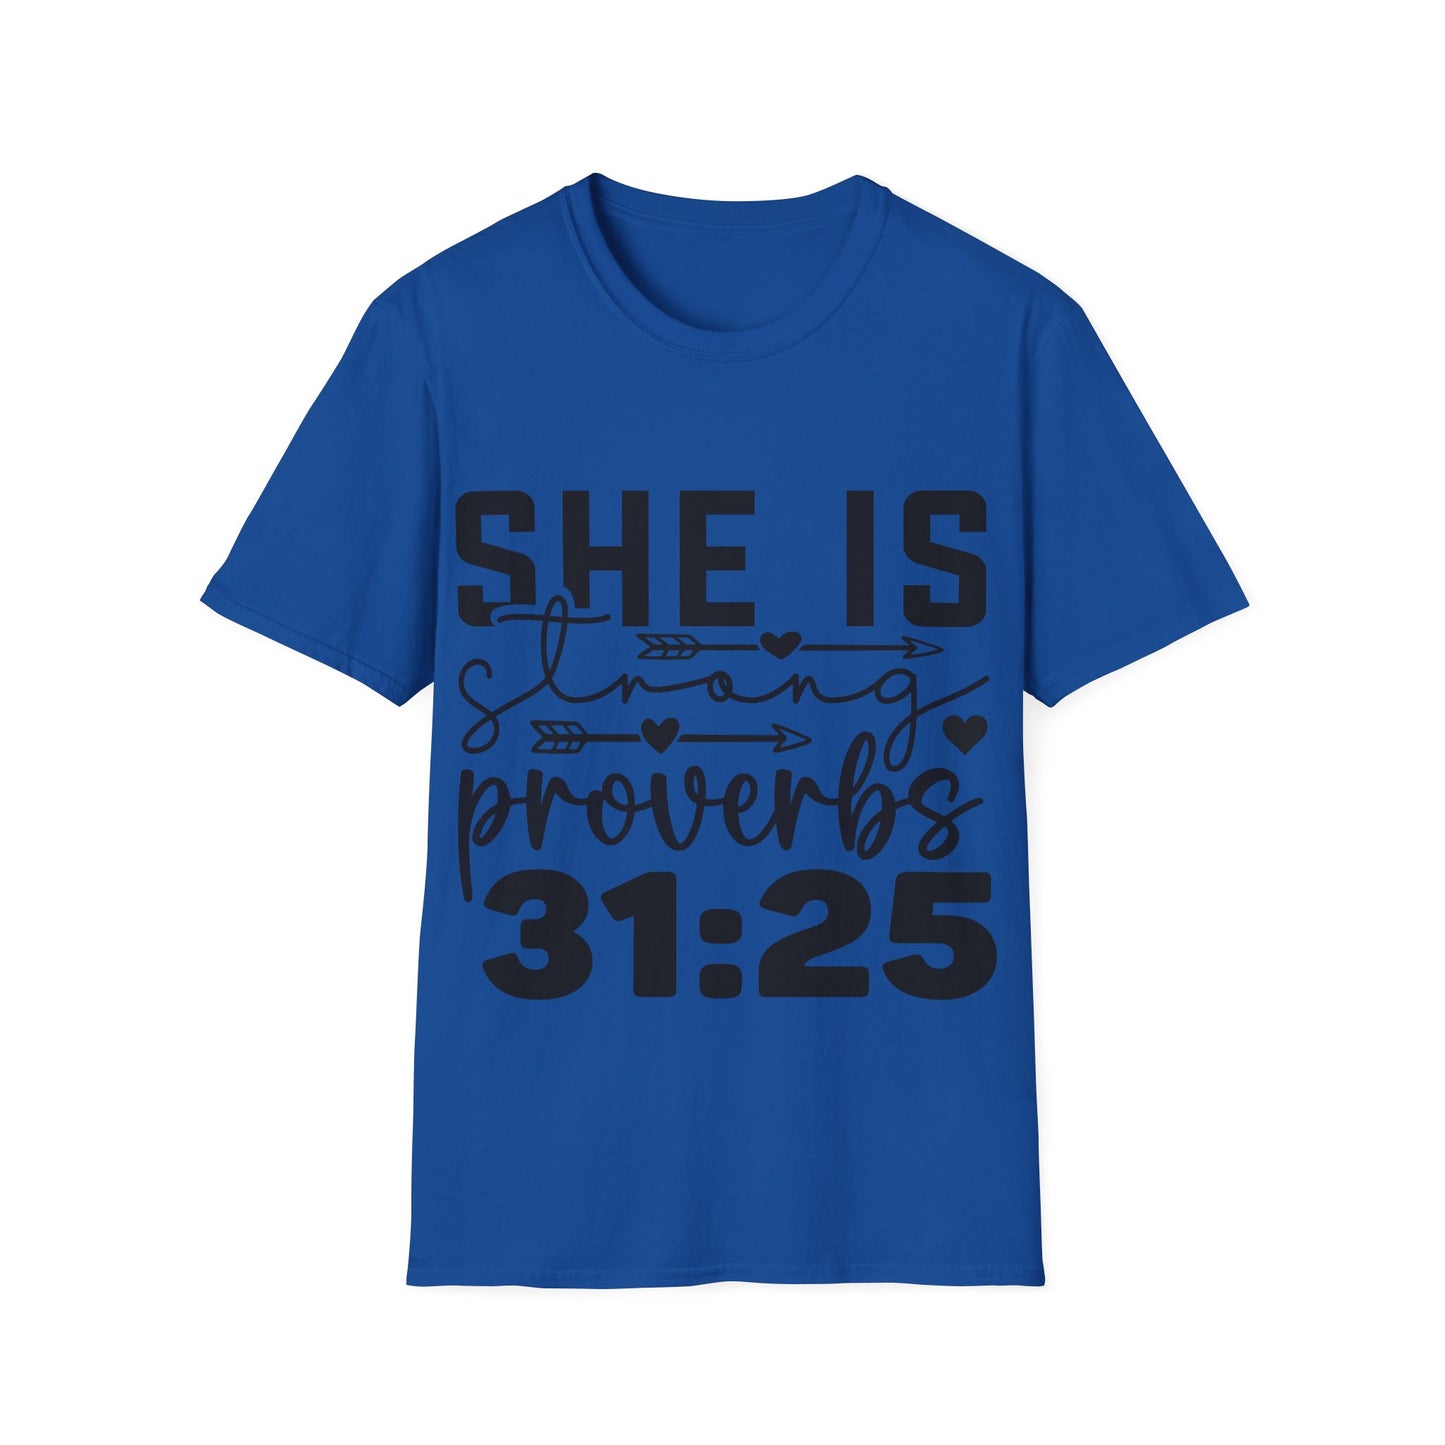 She Is Strong Proverbs 31:25 (2) Triple Viking T-Shirt